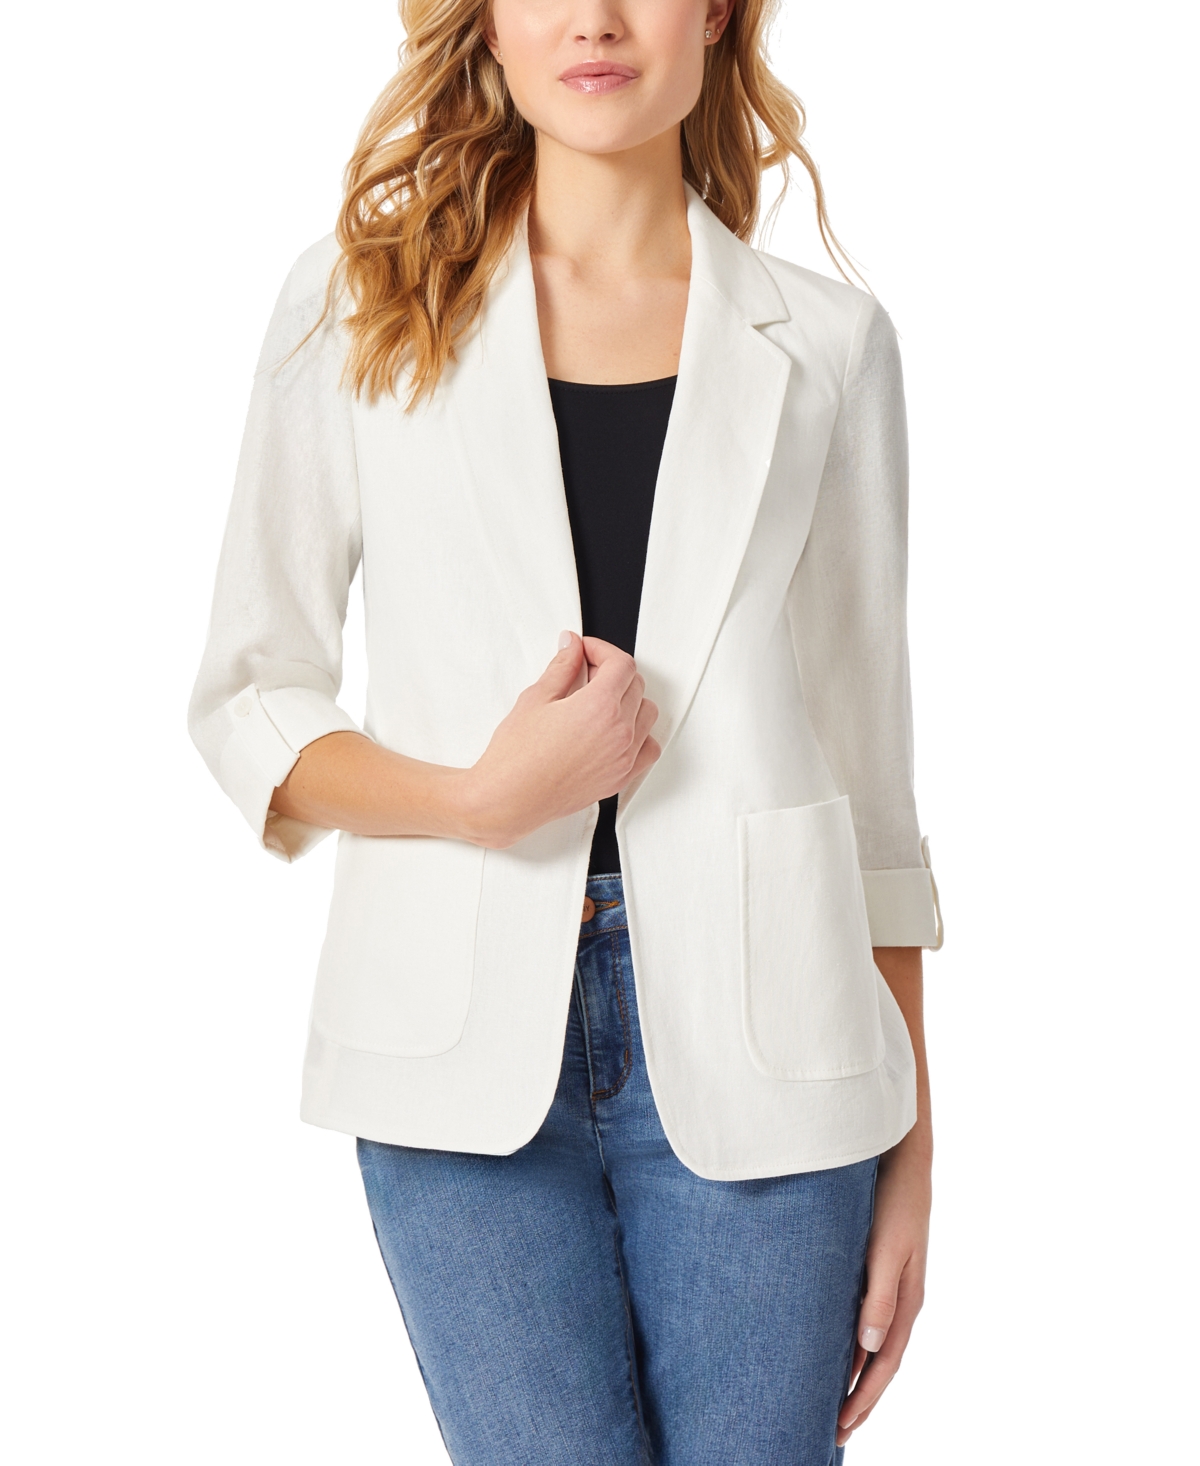 Women's Solid Notched-Collar Patch-Pocket Linen Jacket - NYC White